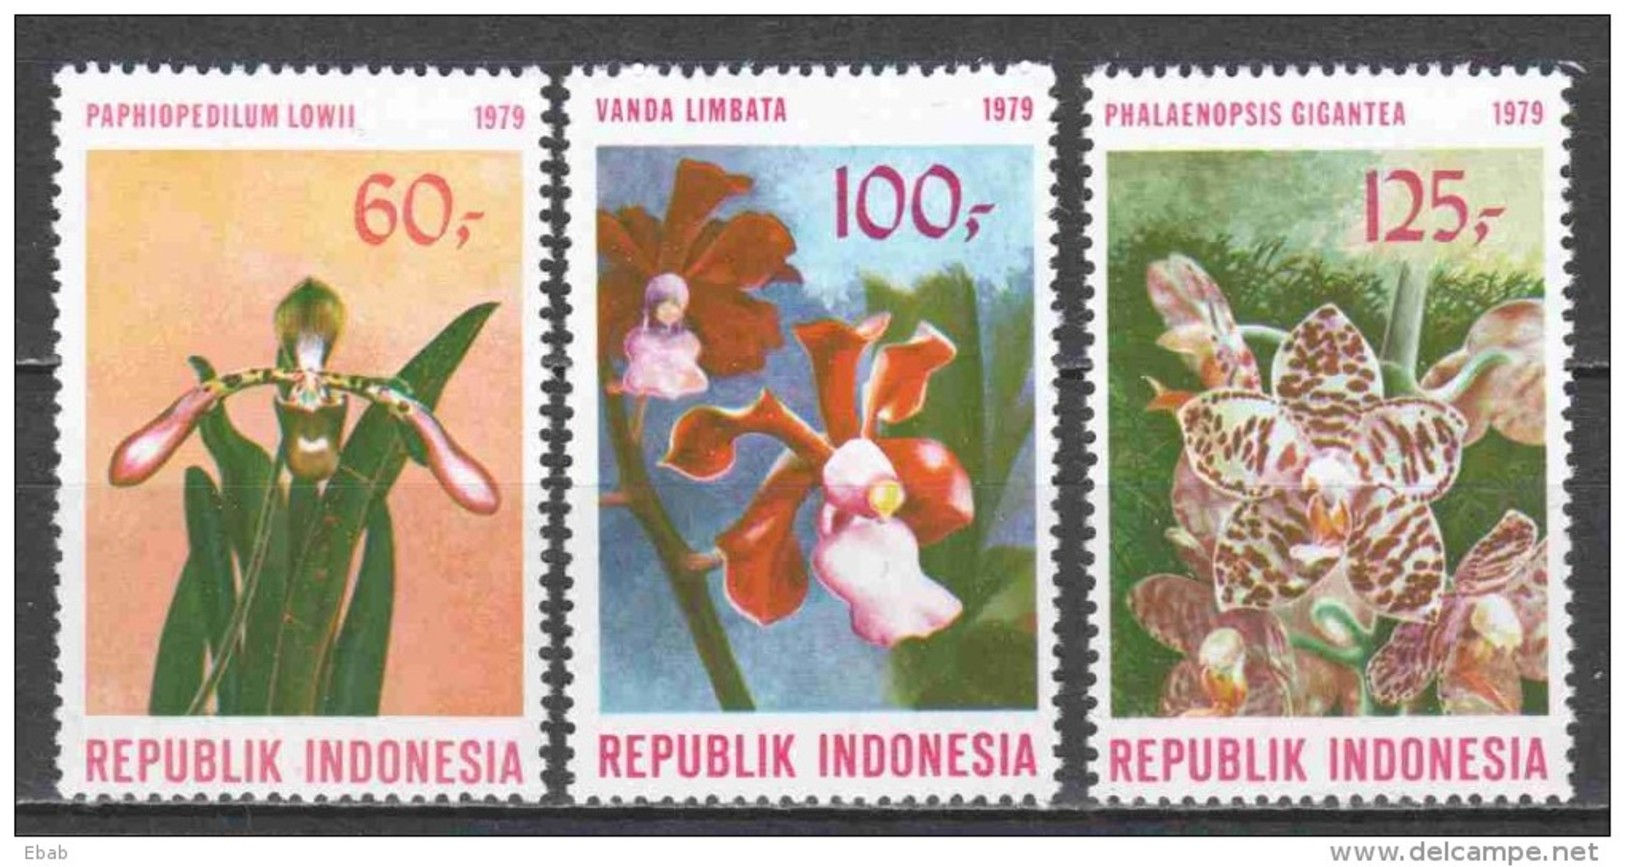 Indonesia 1979 Mi 923-925 MNH ORCHIDS FLOWERS (A) - Indonesië